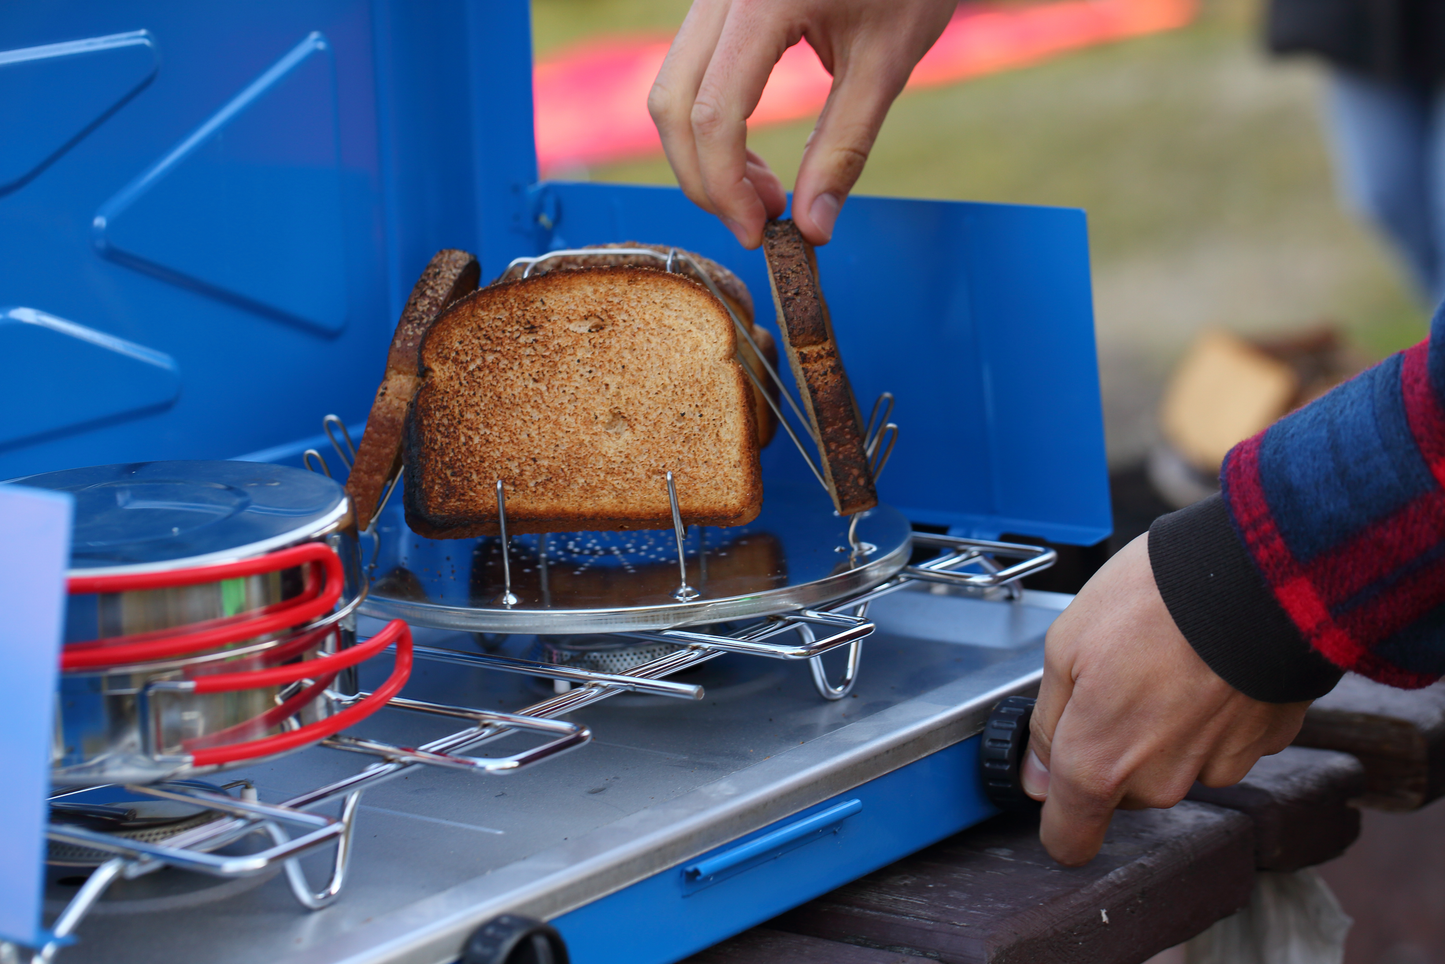 Camp Stove Toaster